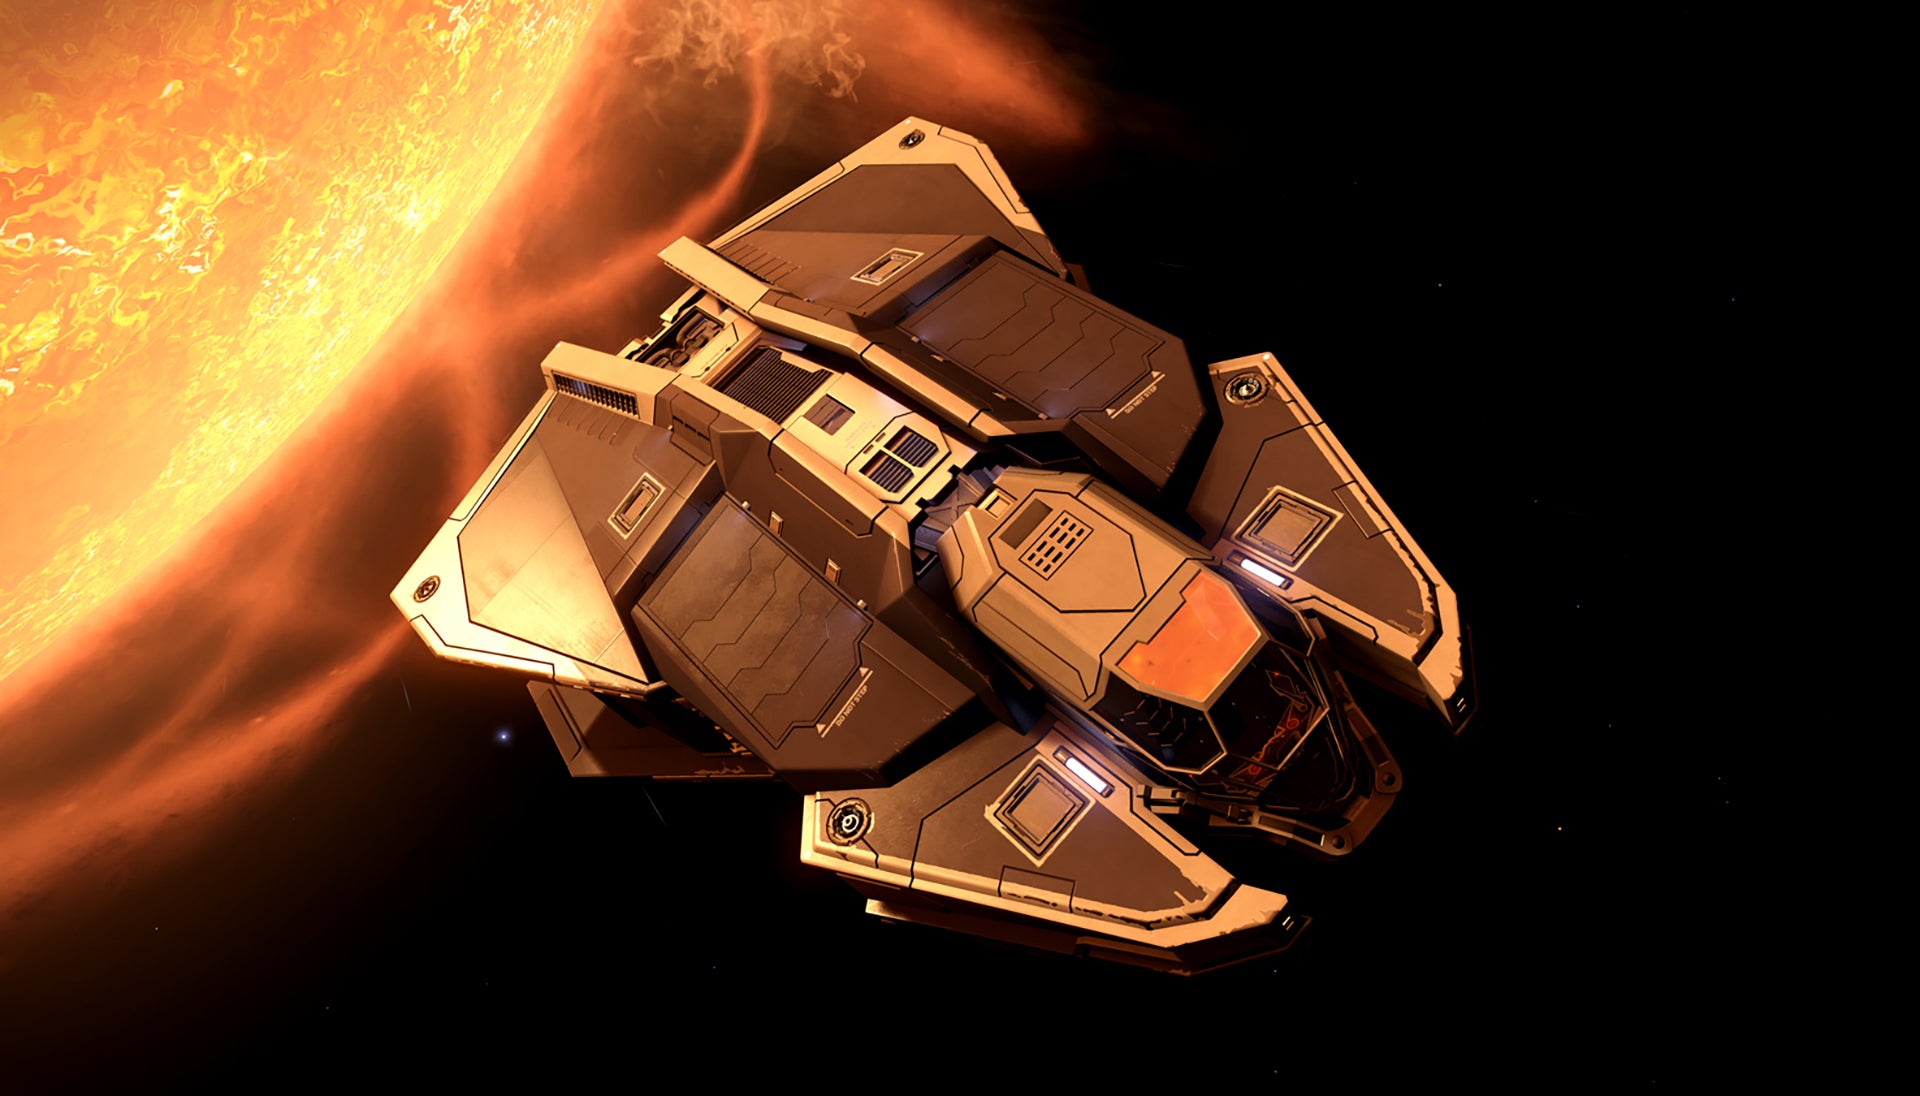 Image for Elite: Dangerous Race to Elite winners announced, one player makes £10,000 